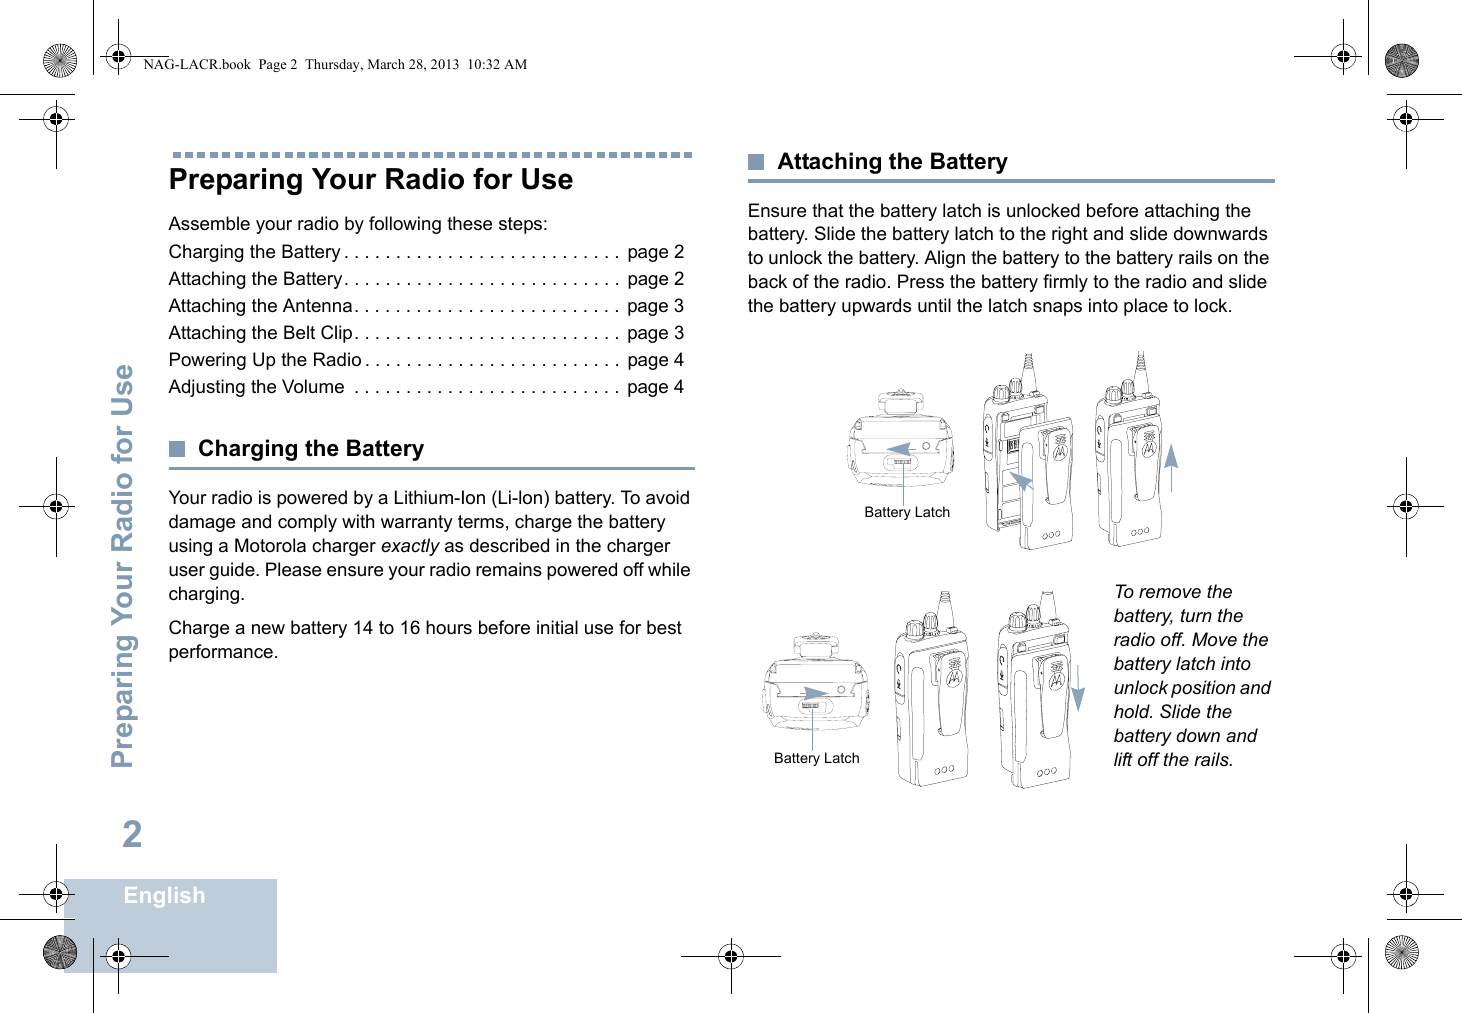 Preparing Your Radio for UseEnglish2Preparing Your Radio for UseAssemble your radio by following these steps:Charging the Battery . . . . . . . . . . . . . . . . . . . . . . . . . . .  page 2Attaching the Battery. . . . . . . . . . . . . . . . . . . . . . . . . . .  page 2Attaching the Antenna. . . . . . . . . . . . . . . . . . . . . . . . . .  page 3Attaching the Belt Clip. . . . . . . . . . . . . . . . . . . . . . . . . .  page 3Powering Up the Radio . . . . . . . . . . . . . . . . . . . . . . . . .  page 4Adjusting the Volume  . . . . . . . . . . . . . . . . . . . . . . . . . .  page 4Charging the BatteryYour radio is powered by a Lithium-Ion (Li-lon) battery. To avoid damage and comply with warranty terms, charge the battery using a Motorola charger exactly as described in the charger user guide. Please ensure your radio remains powered off while charging.Charge a new battery 14 to 16 hours before initial use for best performance.Attaching the BatteryEnsure that the battery latch is unlocked before attaching the battery. Slide the battery latch to the right and slide downwards to unlock the battery. Align the battery to the battery rails on the back of the radio. Press the battery firmly to the radio and slide the battery upwards until the latch snaps into place to lock. To remove the battery, turn the radio off. Move the battery latch into unlock position and hold. Slide the battery down and lift off the rails.Battery LatchBattery LatchNAG-LACR.book  Page 2  Thursday, March 28, 2013  10:32 AM